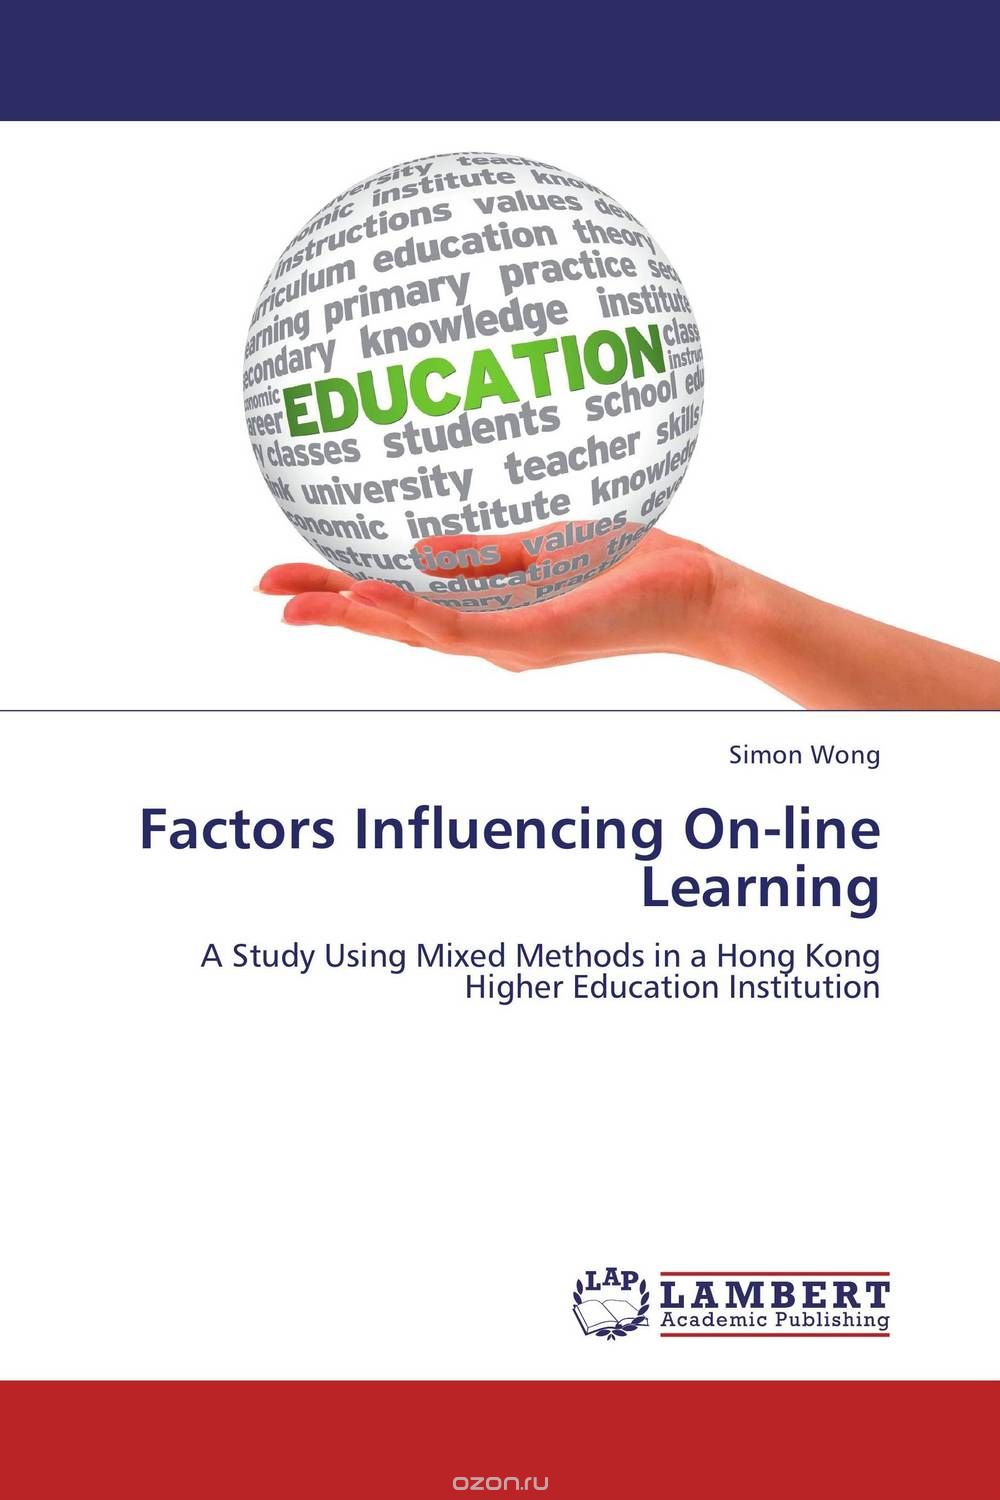 Factors Influencing On-line Learning